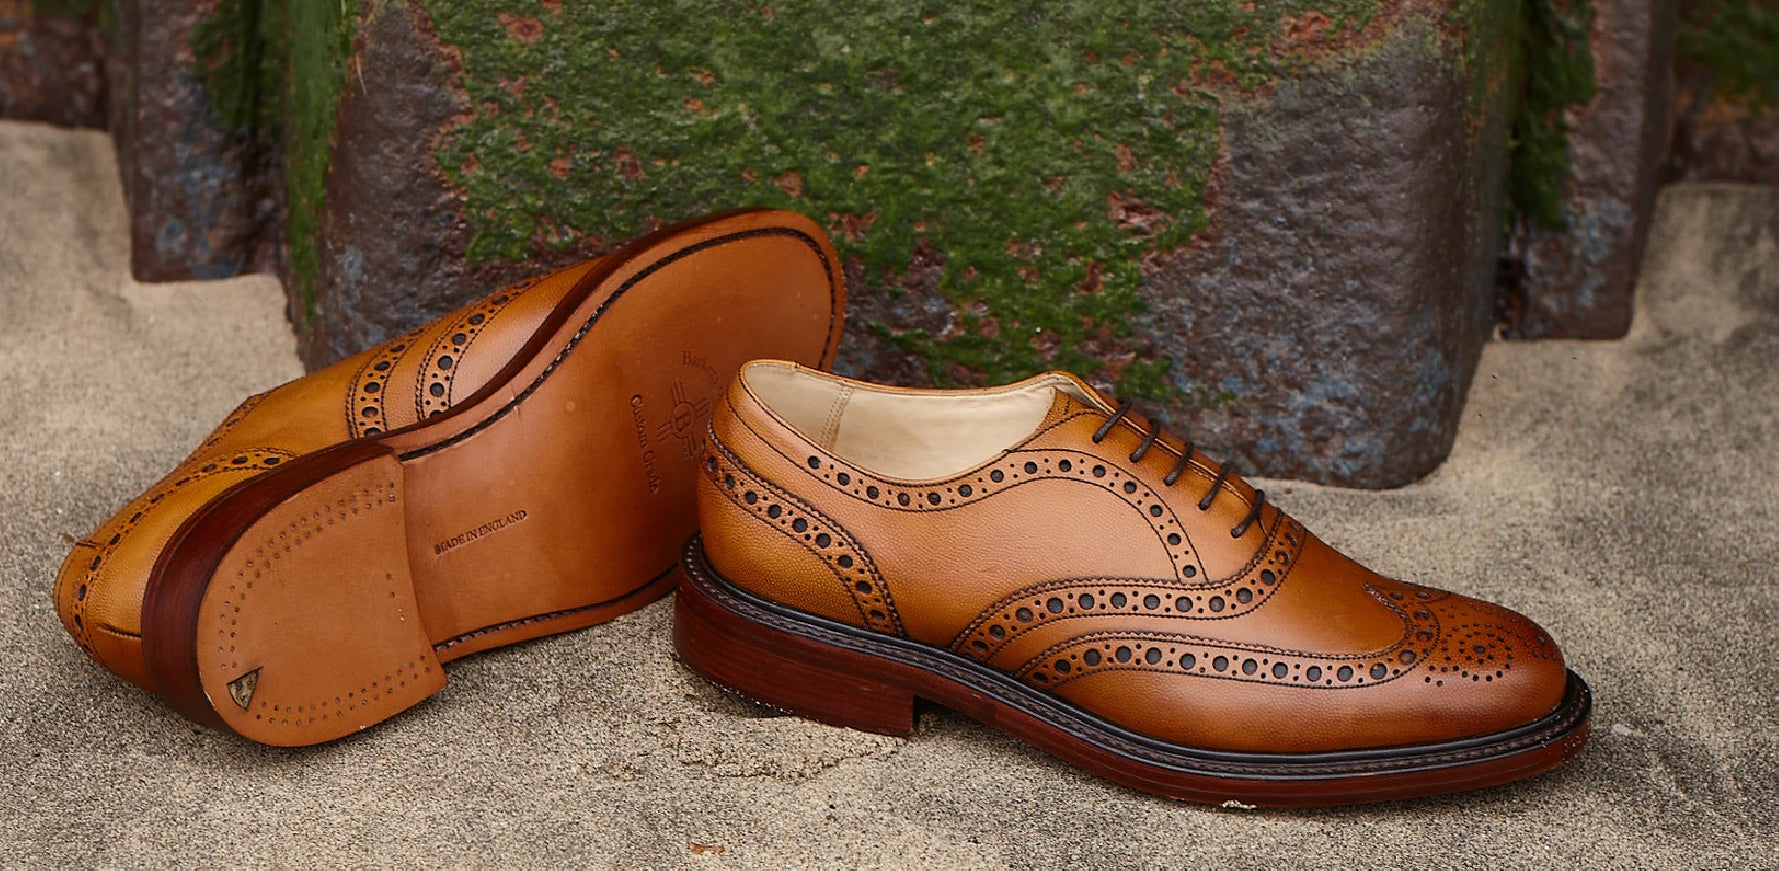 Charles - Men's Handmade Leather Brogue Shoes By Barker